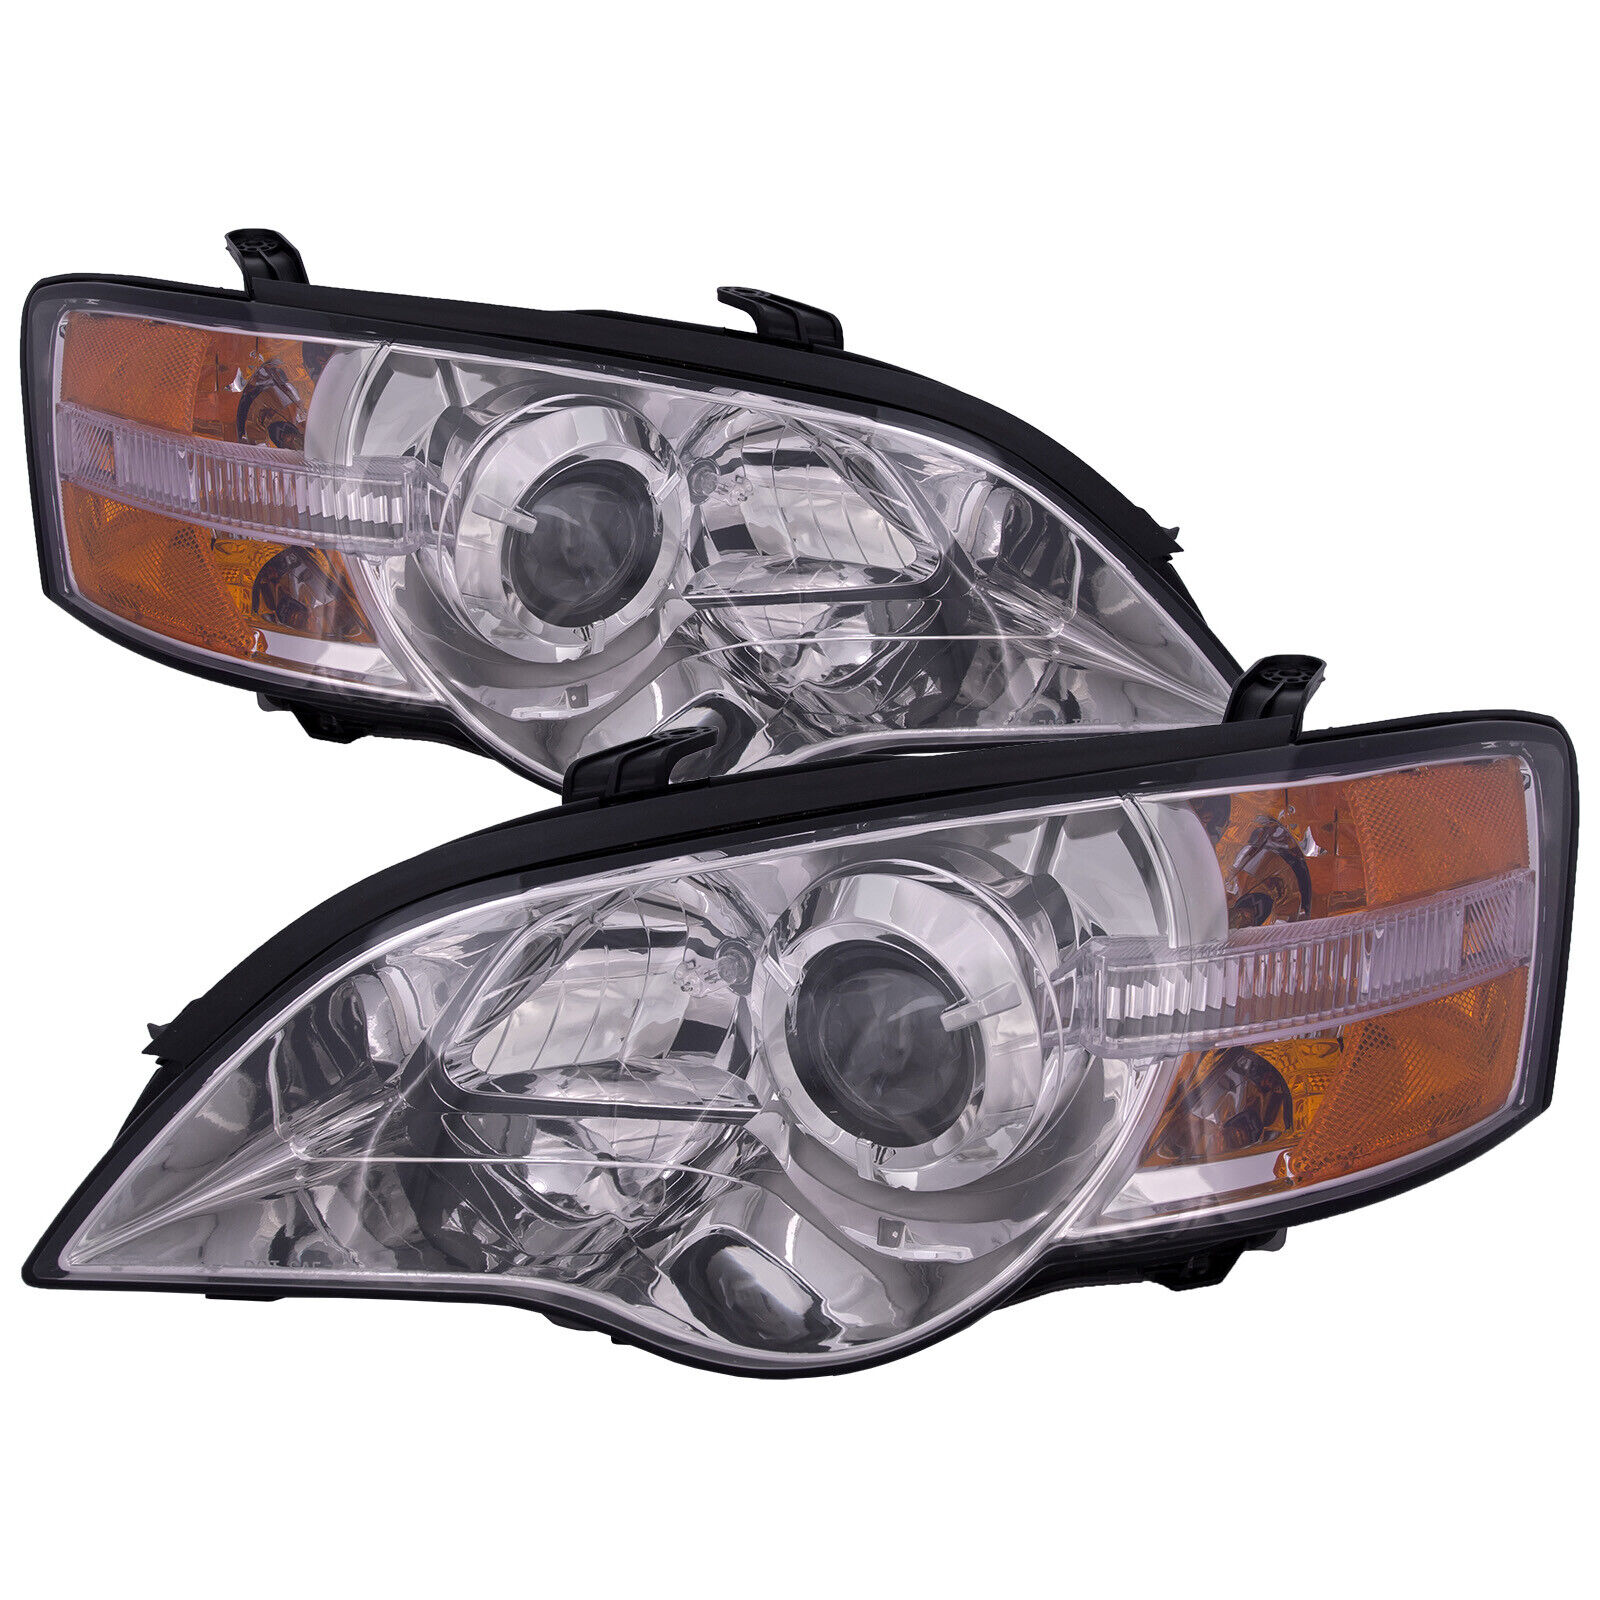 Headlights Fits 2005-2007 Subaru Legacy And Outback Chrome Performance Lamp Pair